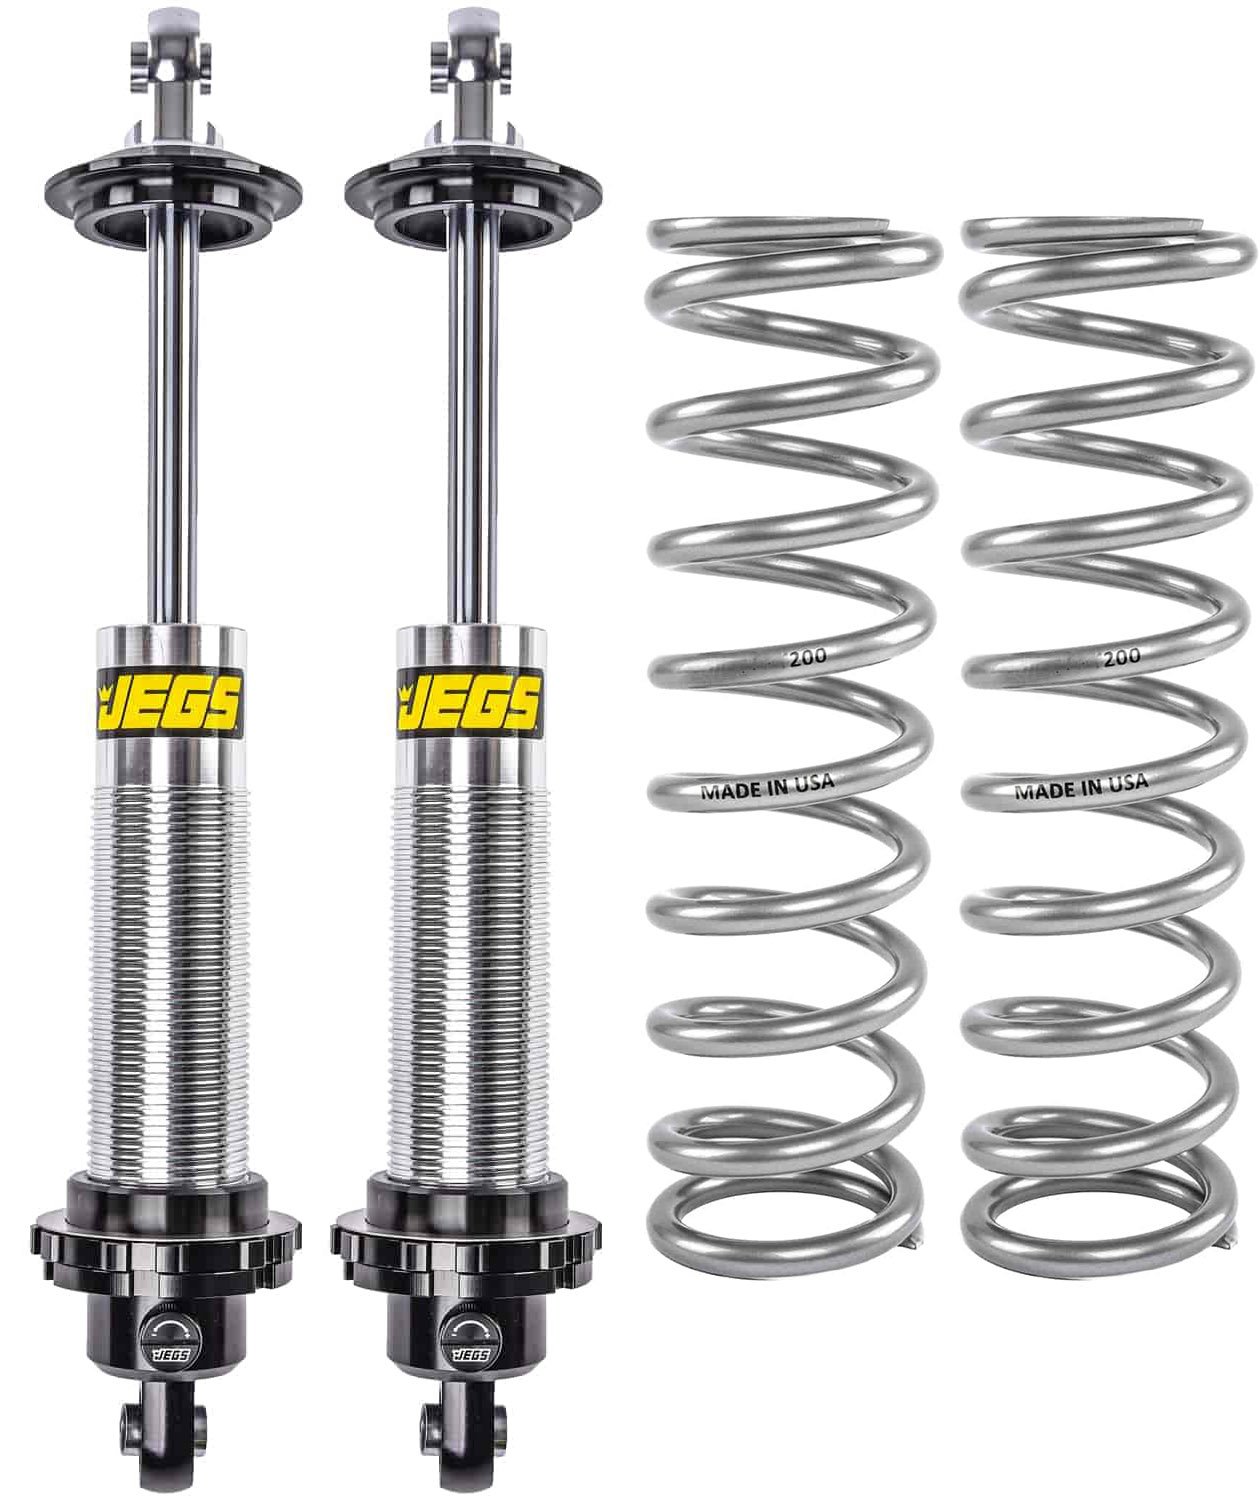 Single Adjustable Coil-Over Shocks and Coil-Over Springs Kit [12 in., 200 lbs./in. Springs]